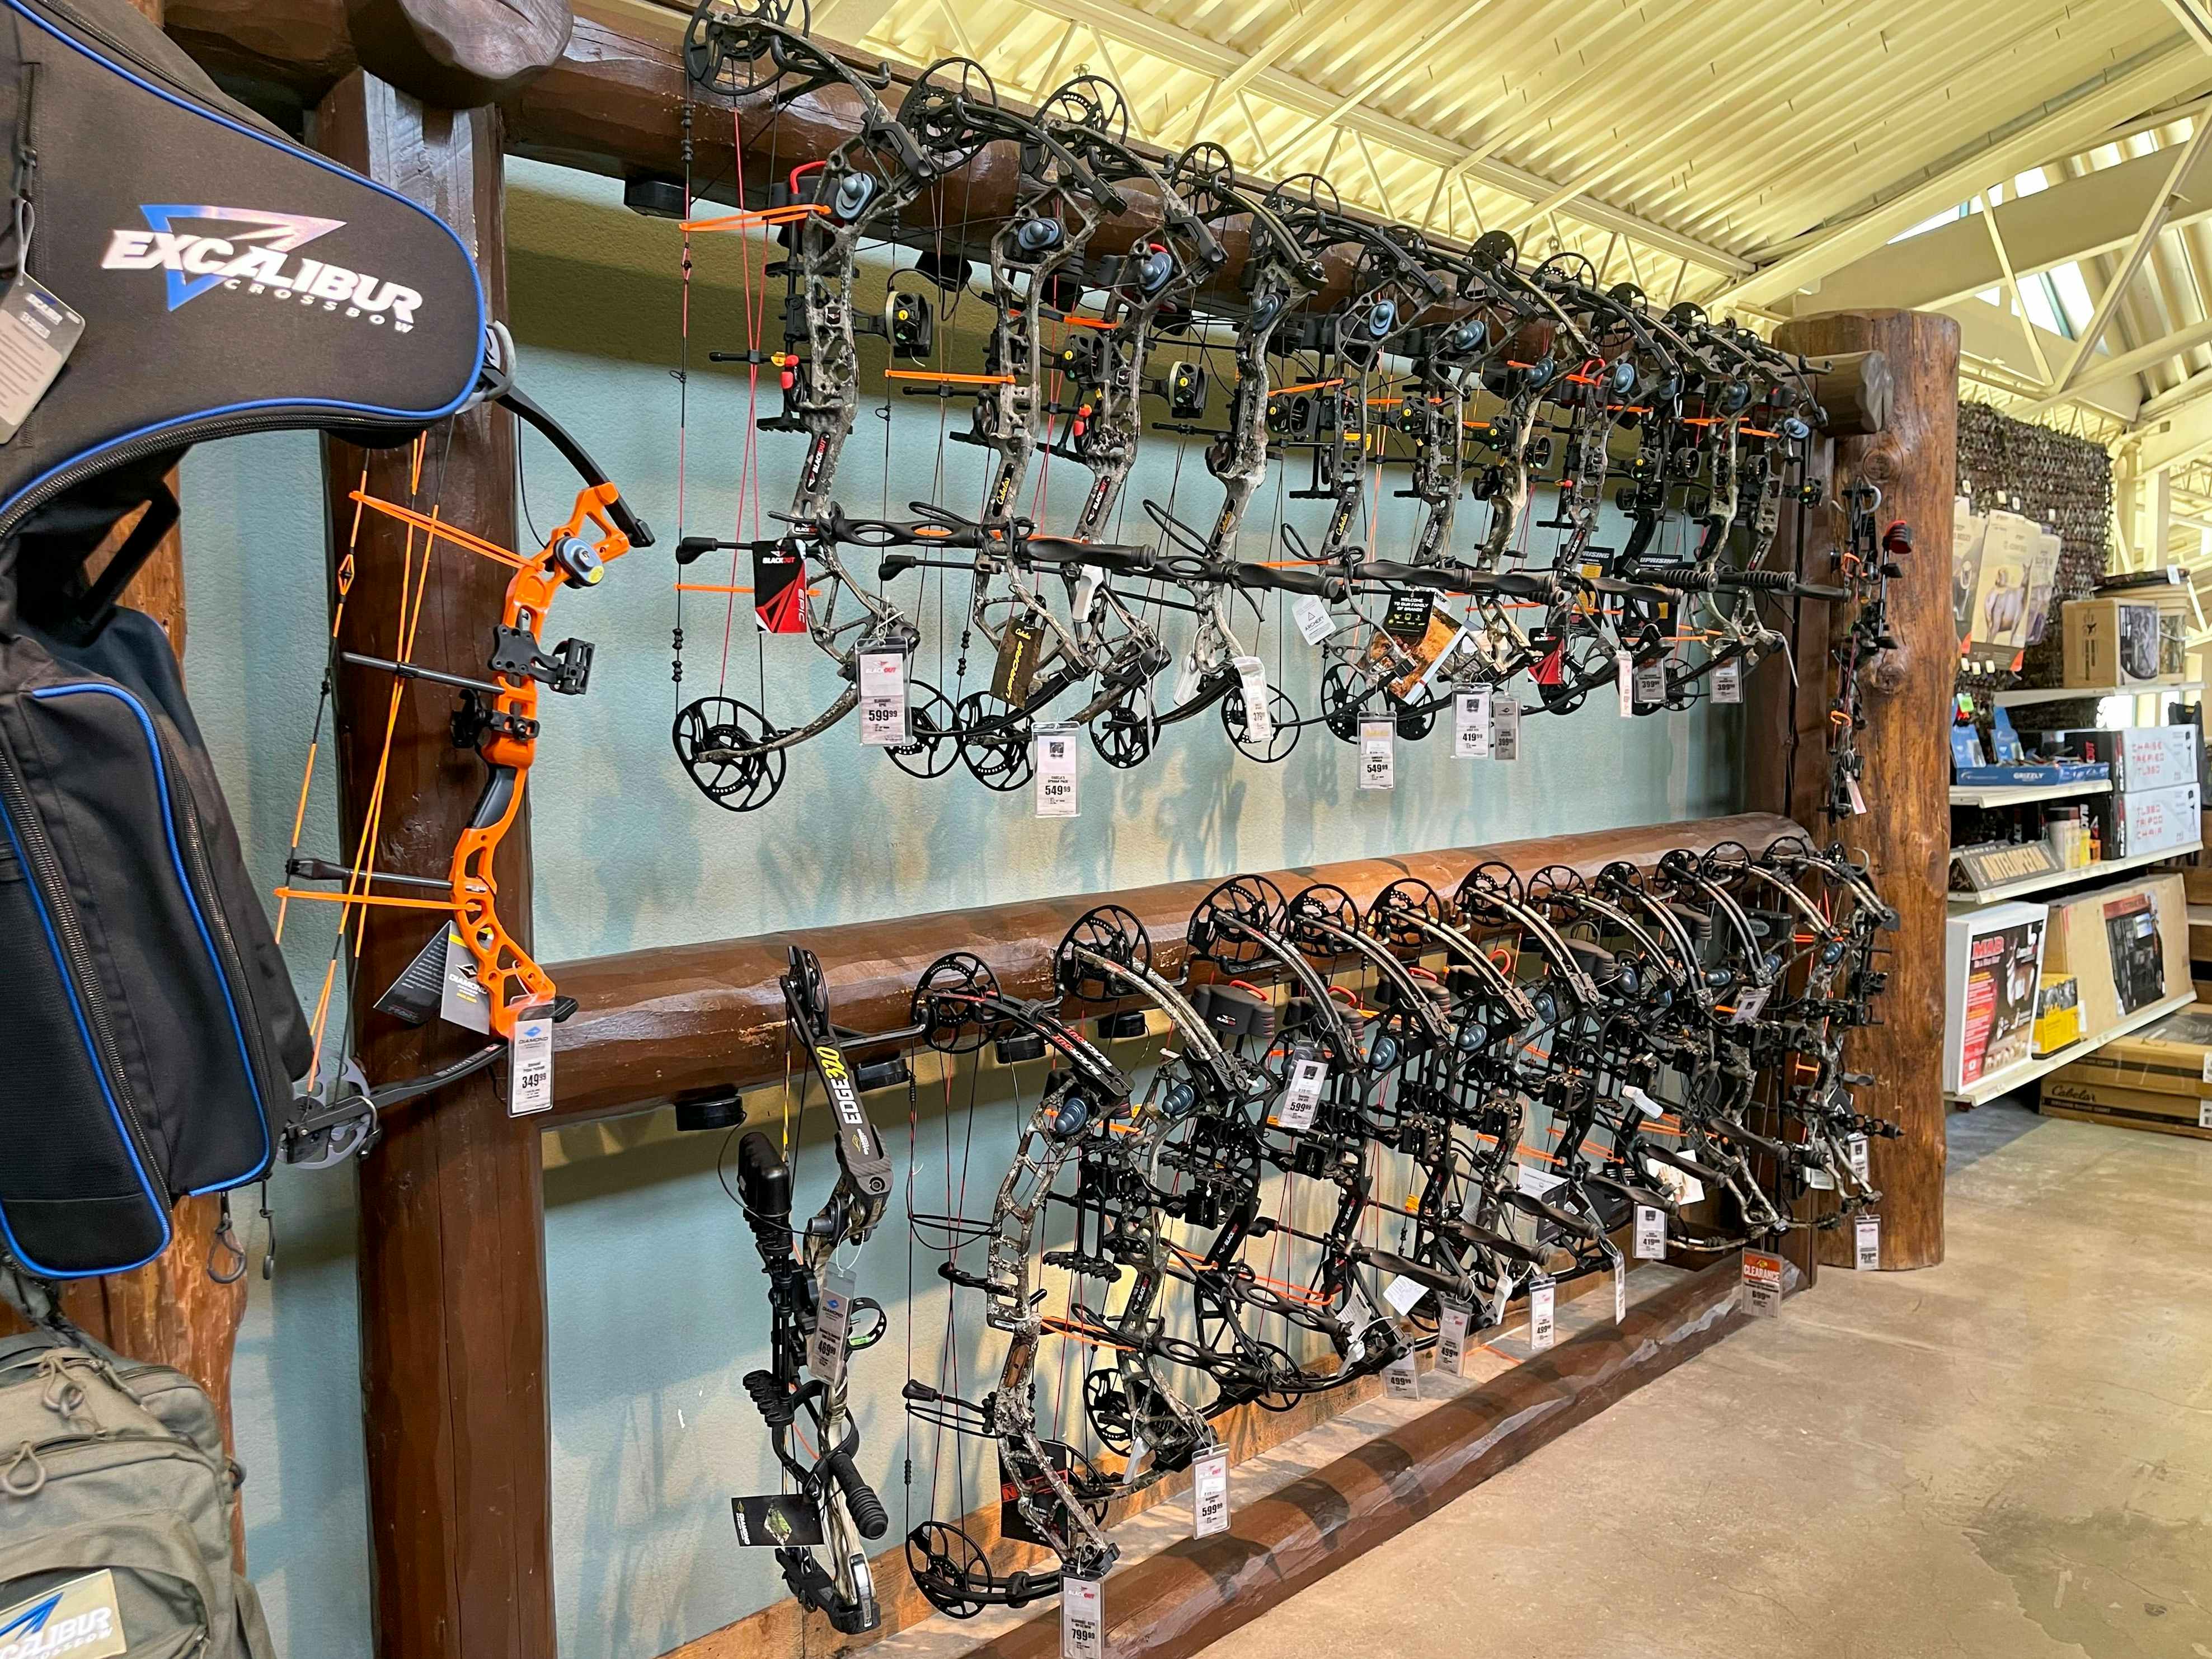 The hunting bow display inside Cabela's.